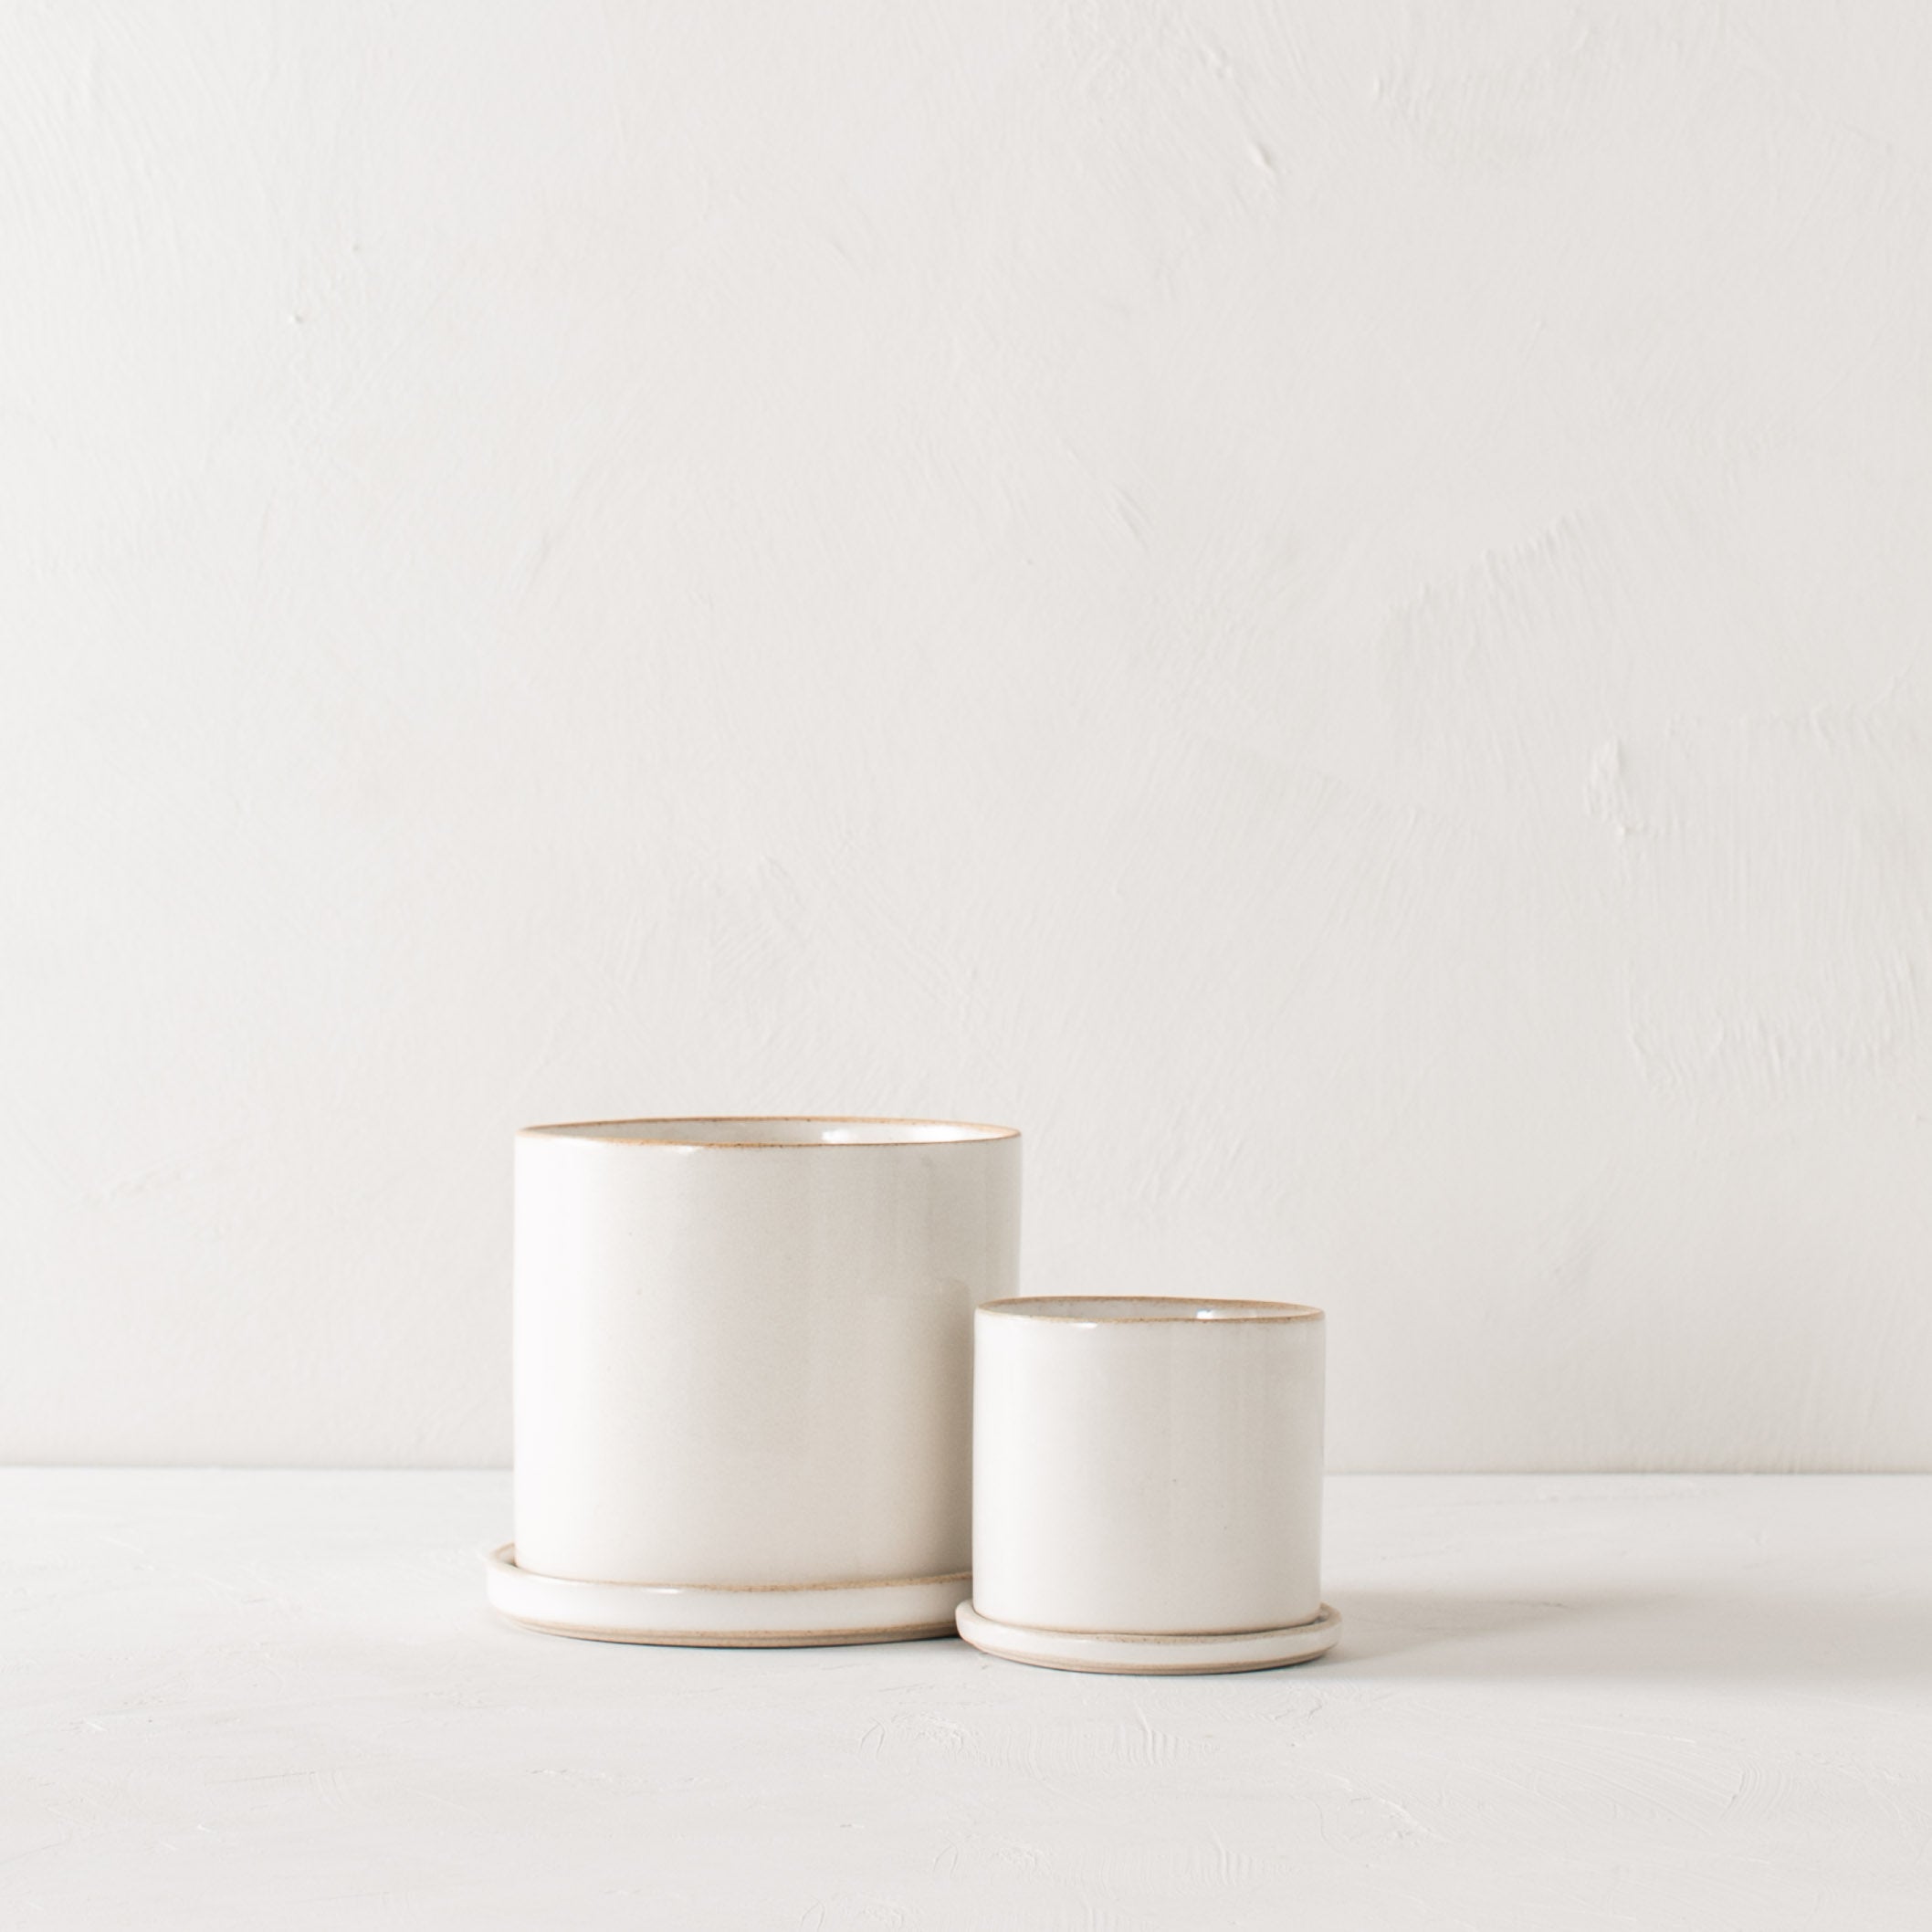 Two minimal white ceramic planters, they have exposed stoneware rims and bases. Both have bottom drainage dishes. Handmade ceramic planters designed and sold by Convivial Production, Kansas City ceramics. 